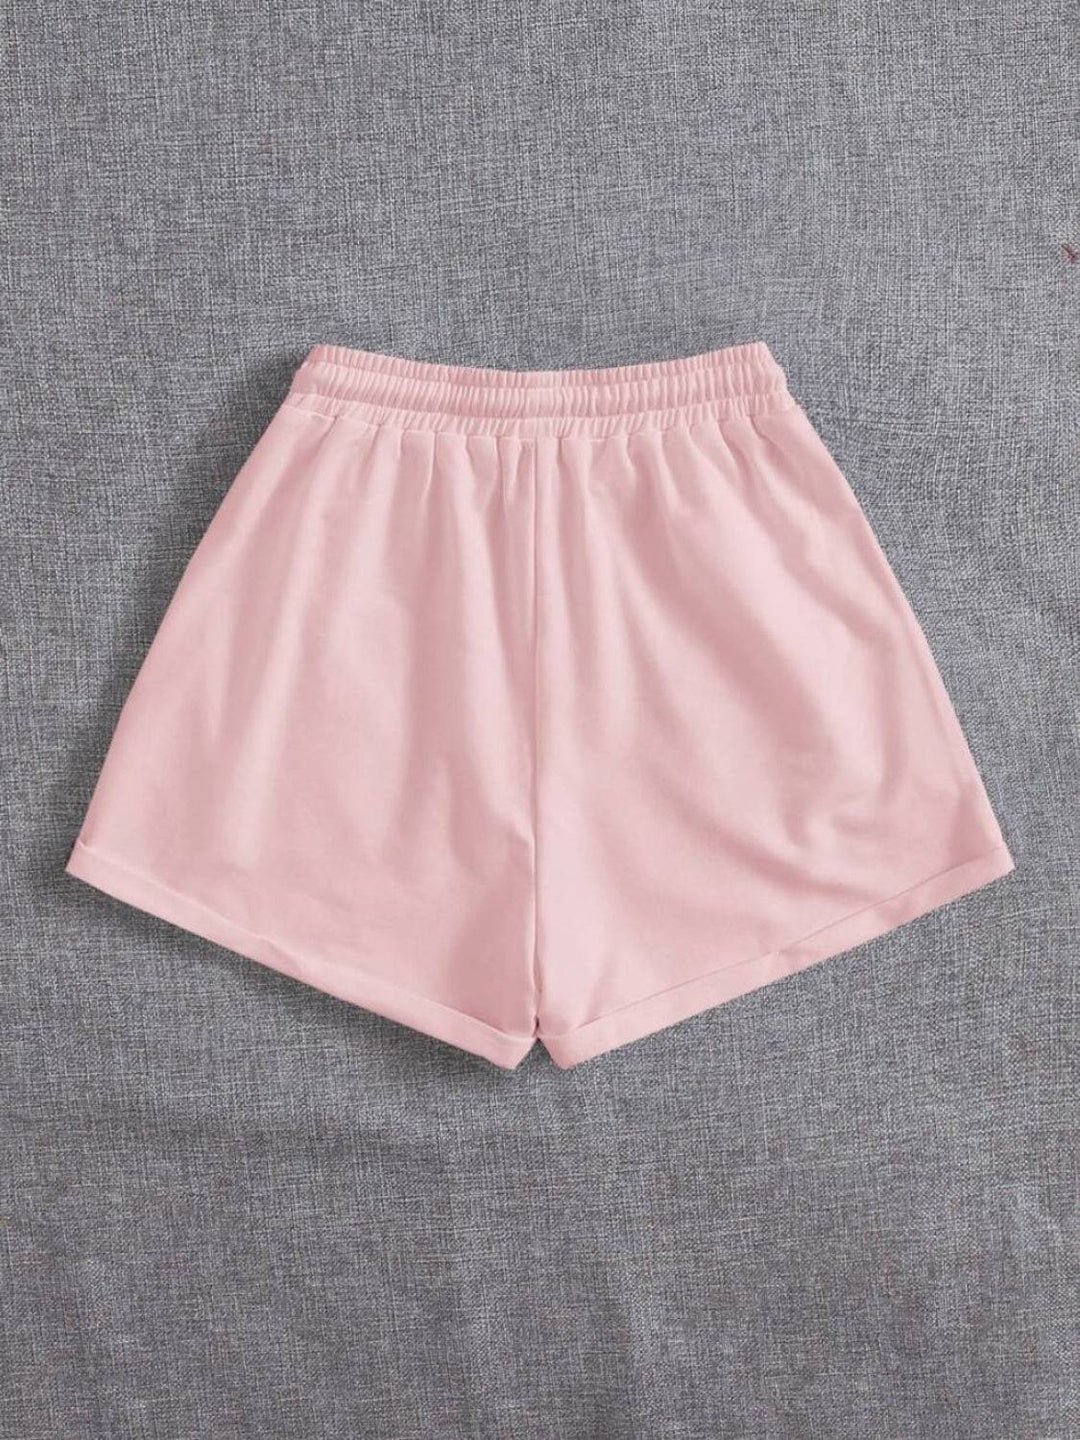 a pair of pink shorts sitting on top of a bed